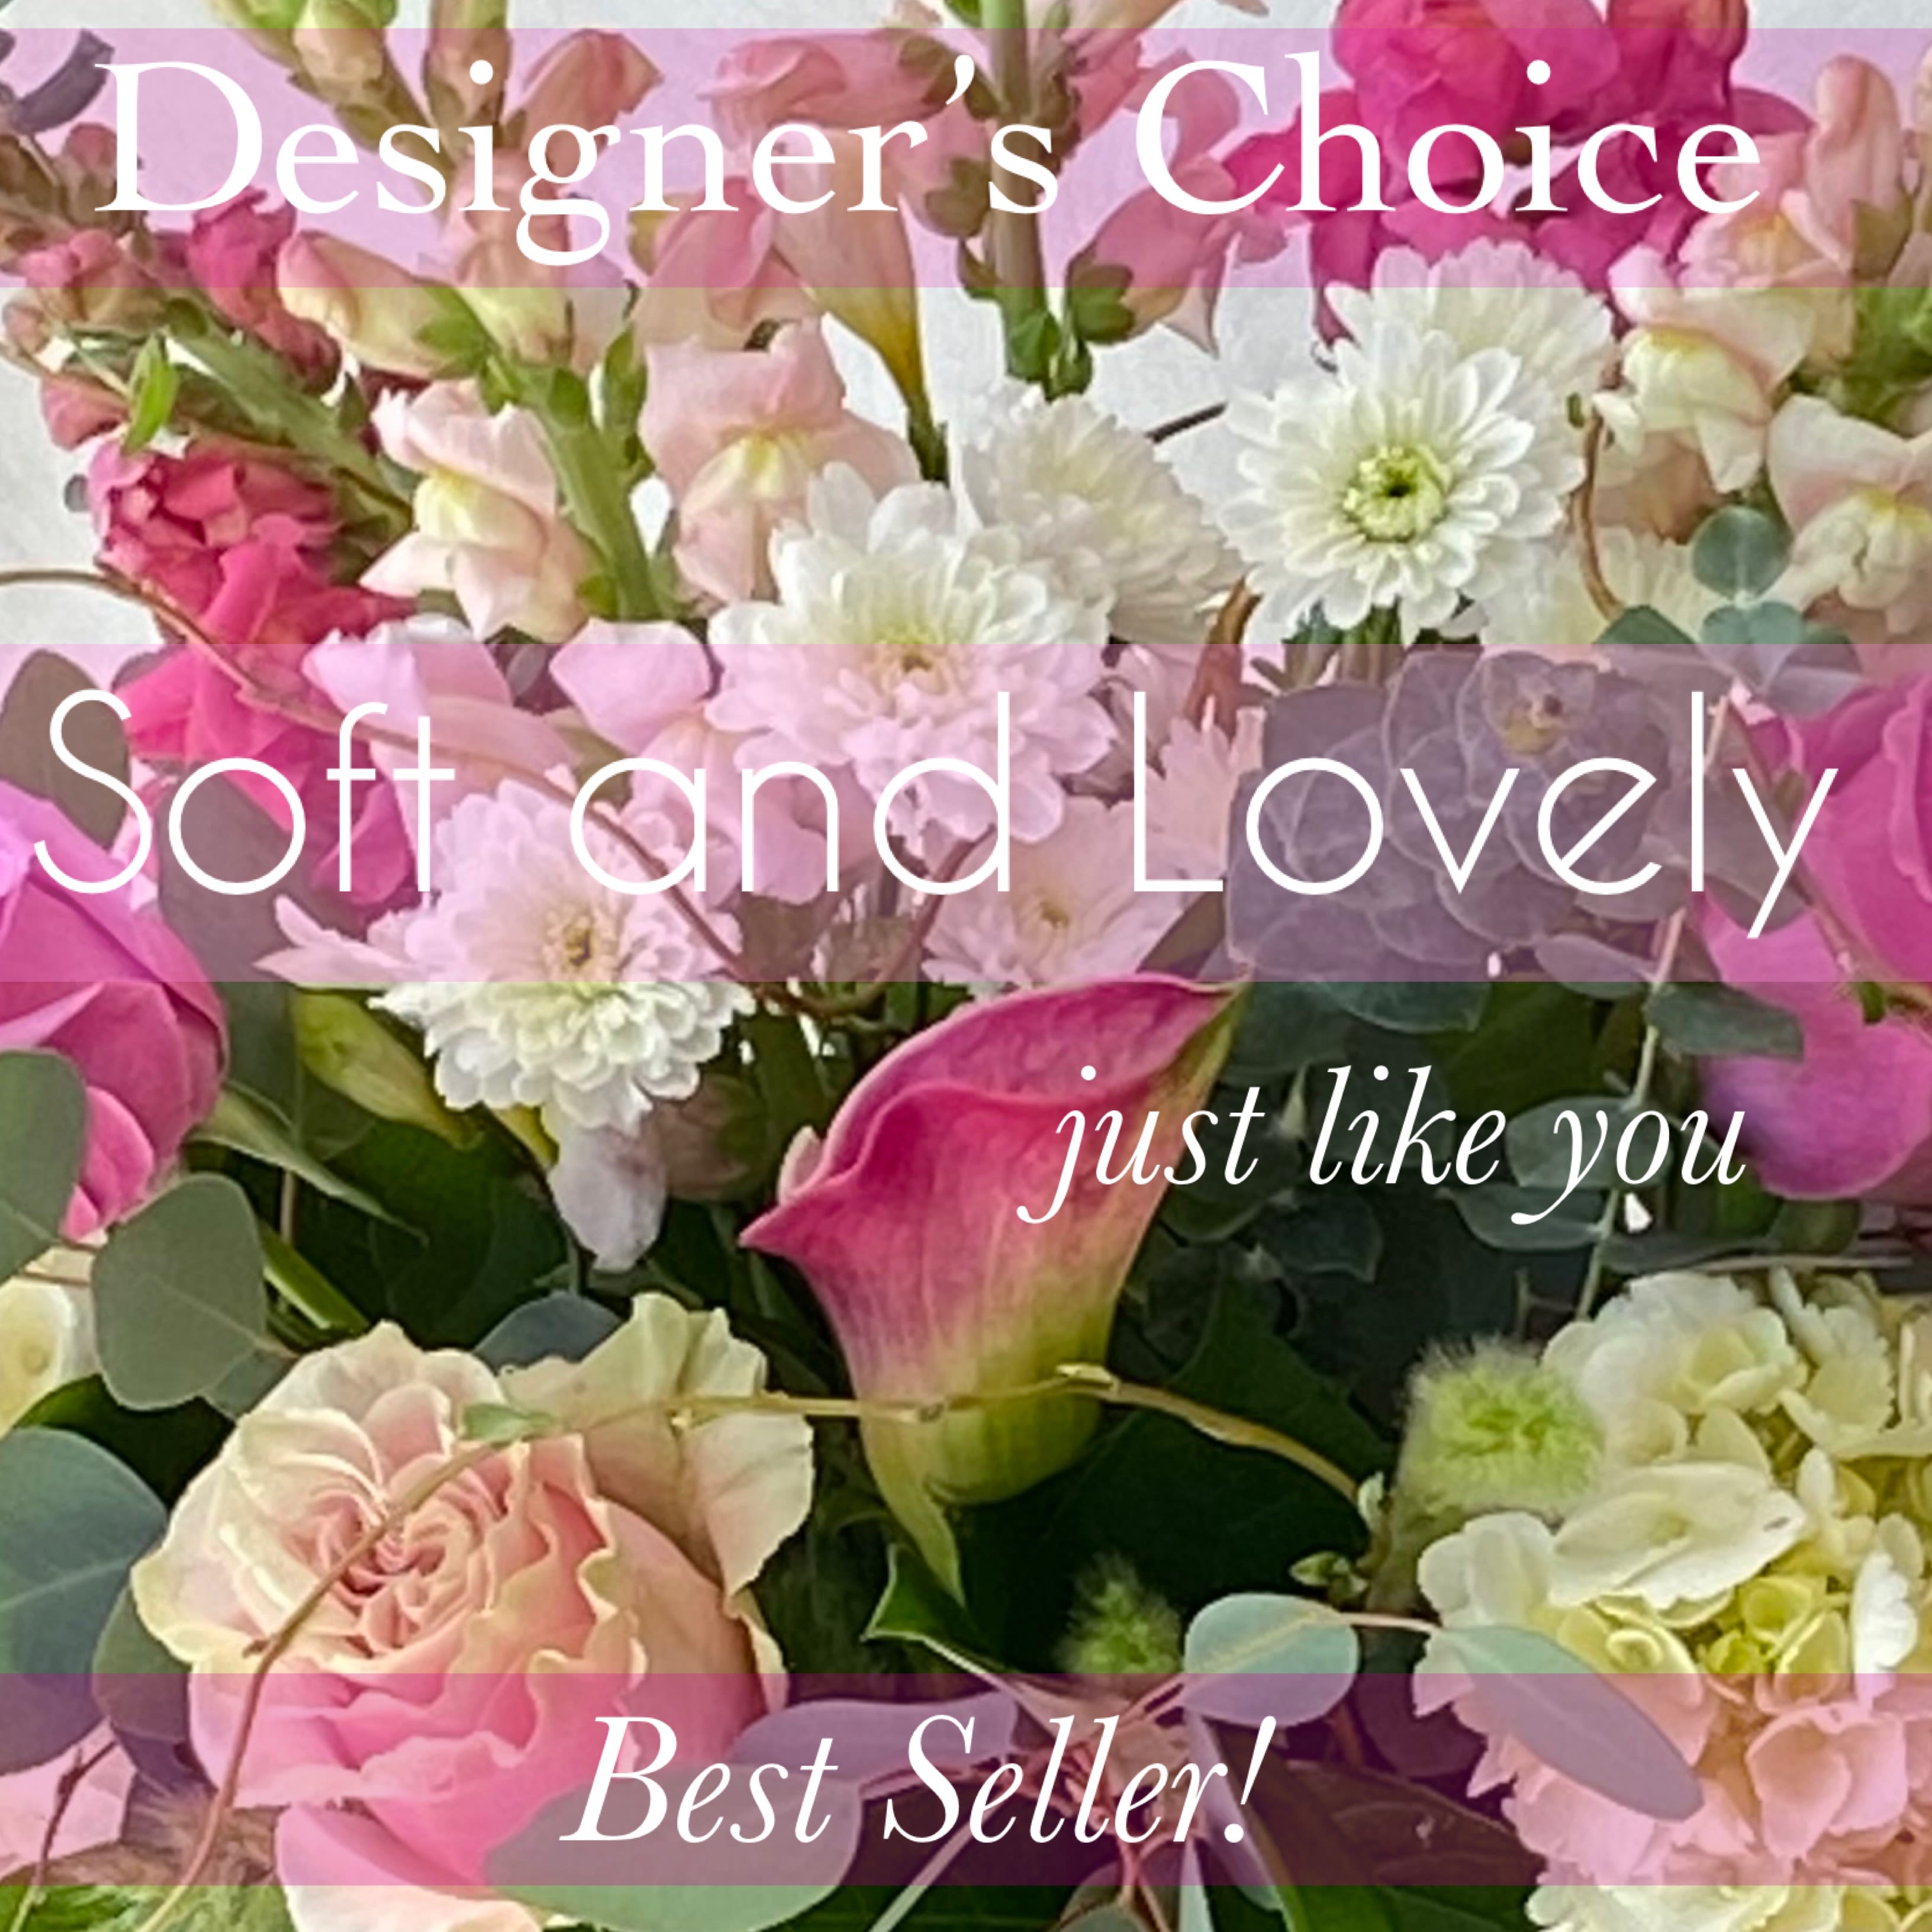 Designer’s Choice Soft Color Pastels - At Flora Verdi choosing “Designers Choice” is always the best way to go!  Designed in a soft and feminine color palette of pinks, white, and green…this Valentines Day special includes a generous selection of light and medium pink roses, snapdragon, alstroemeria, stock, lisianthus, tulips…and other premium garden-type blooms.  * Price increase reflects increase in added roses and premium flowers.  